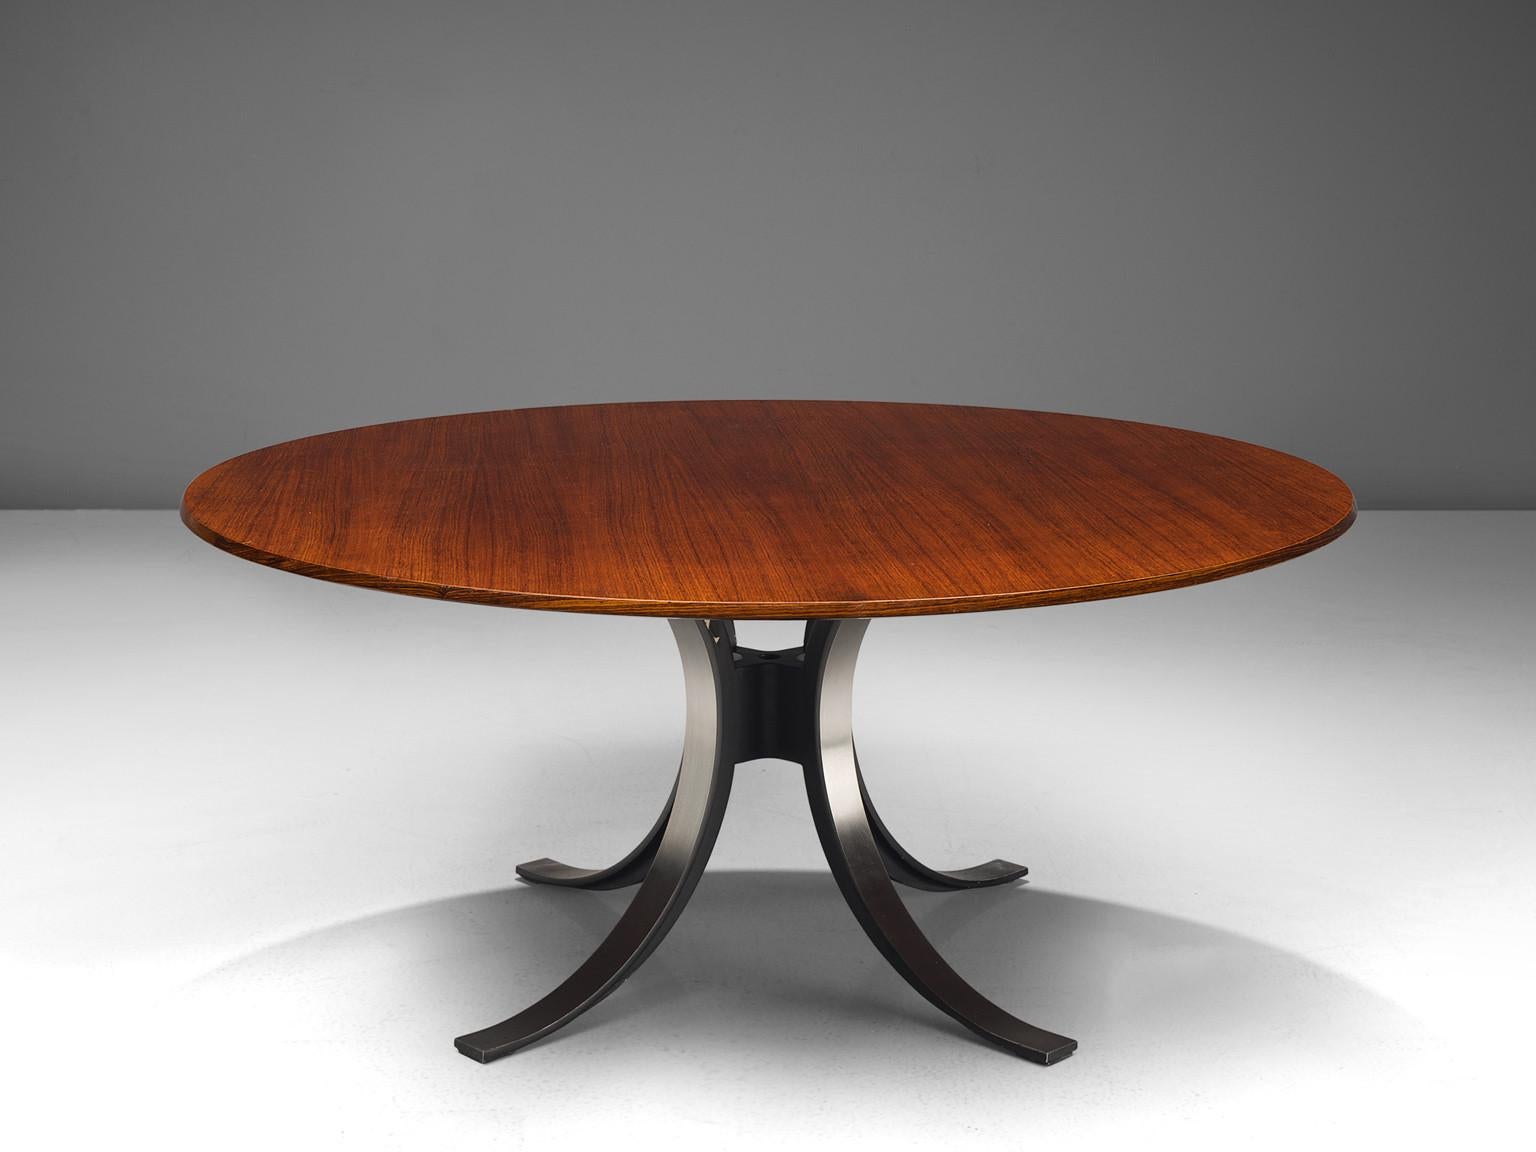 Osvaldo Borsani and Eugenio Gerli for Tecno, dining table, model T69, wood, enameled steel, Italy, 1964 

The designers Borsani and Gerli created together an outstanding piece of furniture that deserves a prominent place in one's living room.